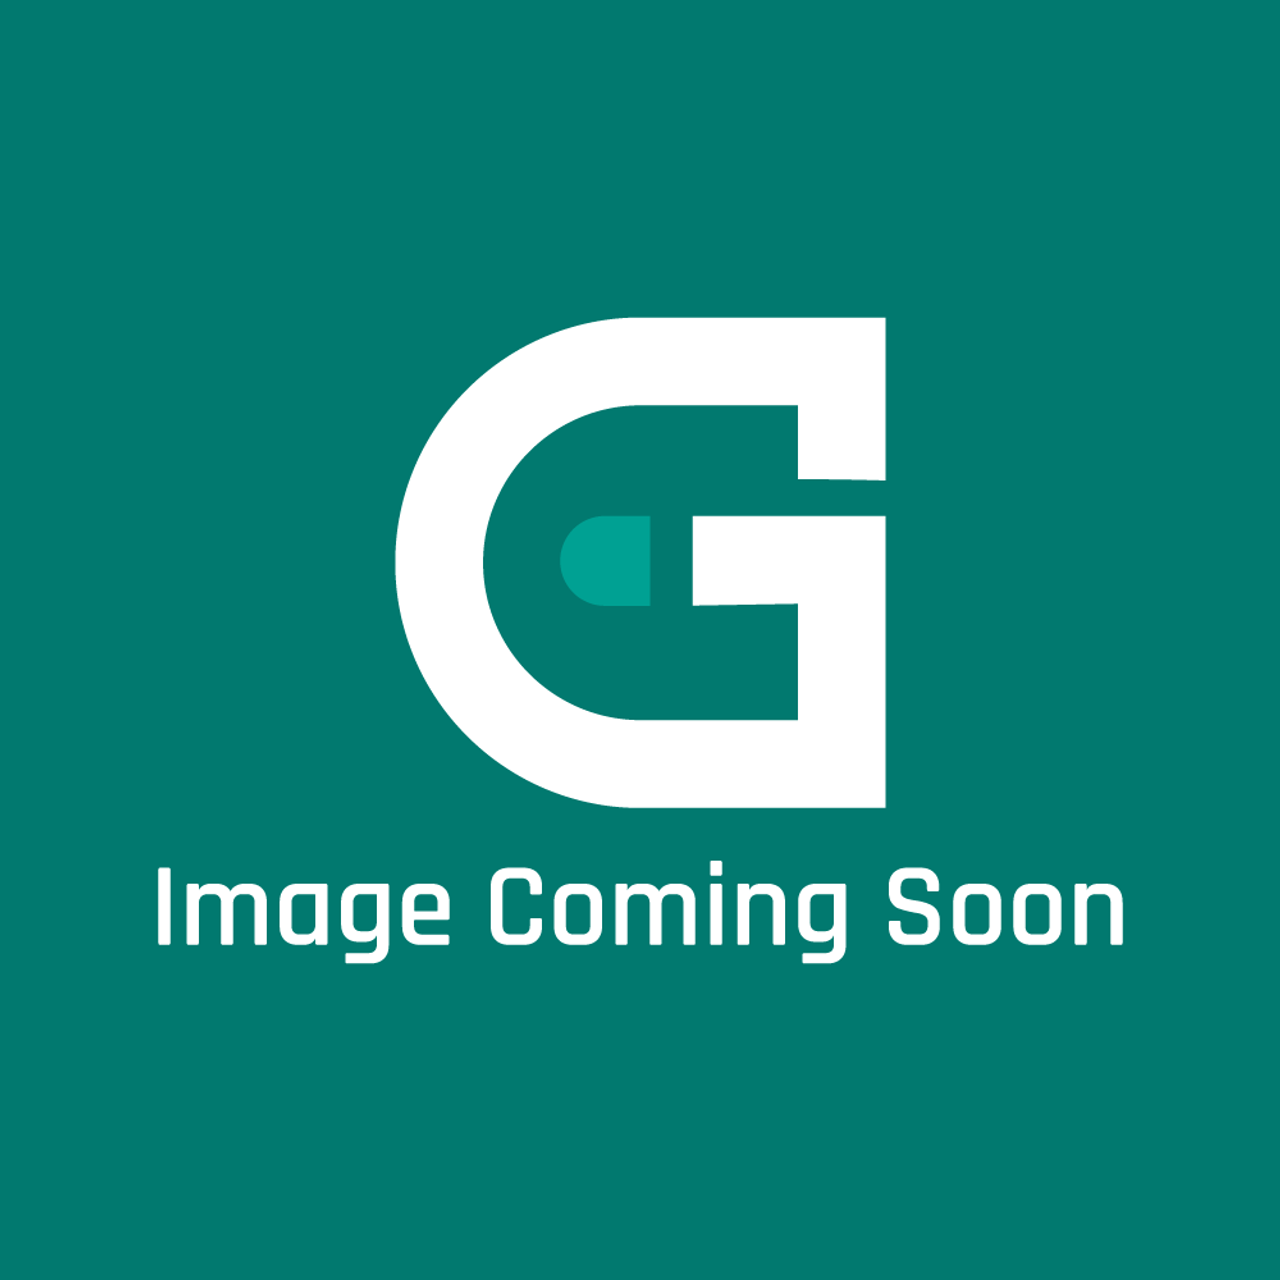 GE Appliances WX15X12 - 1/2 Od Flared Fit (Single) - Image Coming Soon!